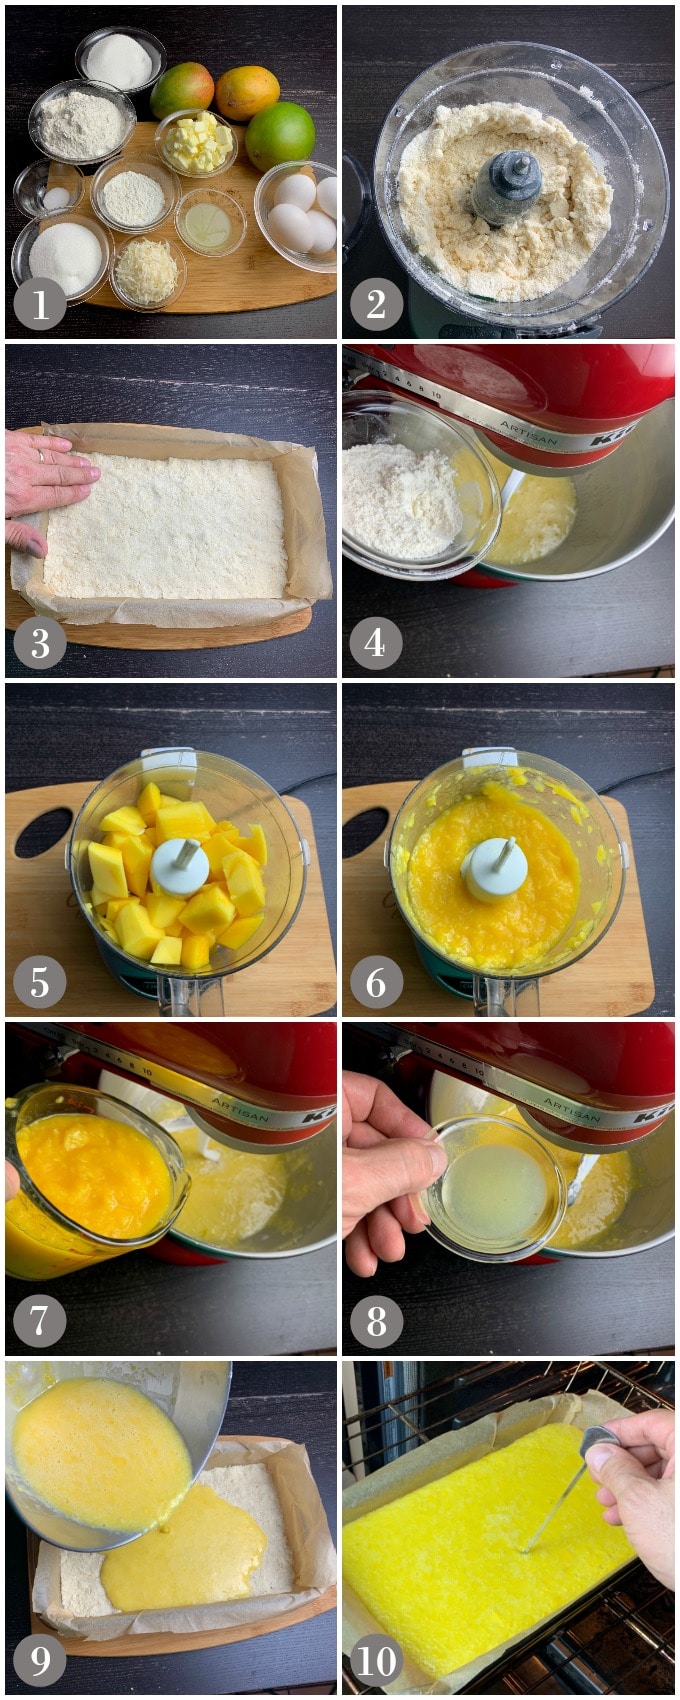 A collage of photos showing the ingredients and steps to make mango lime bars. 